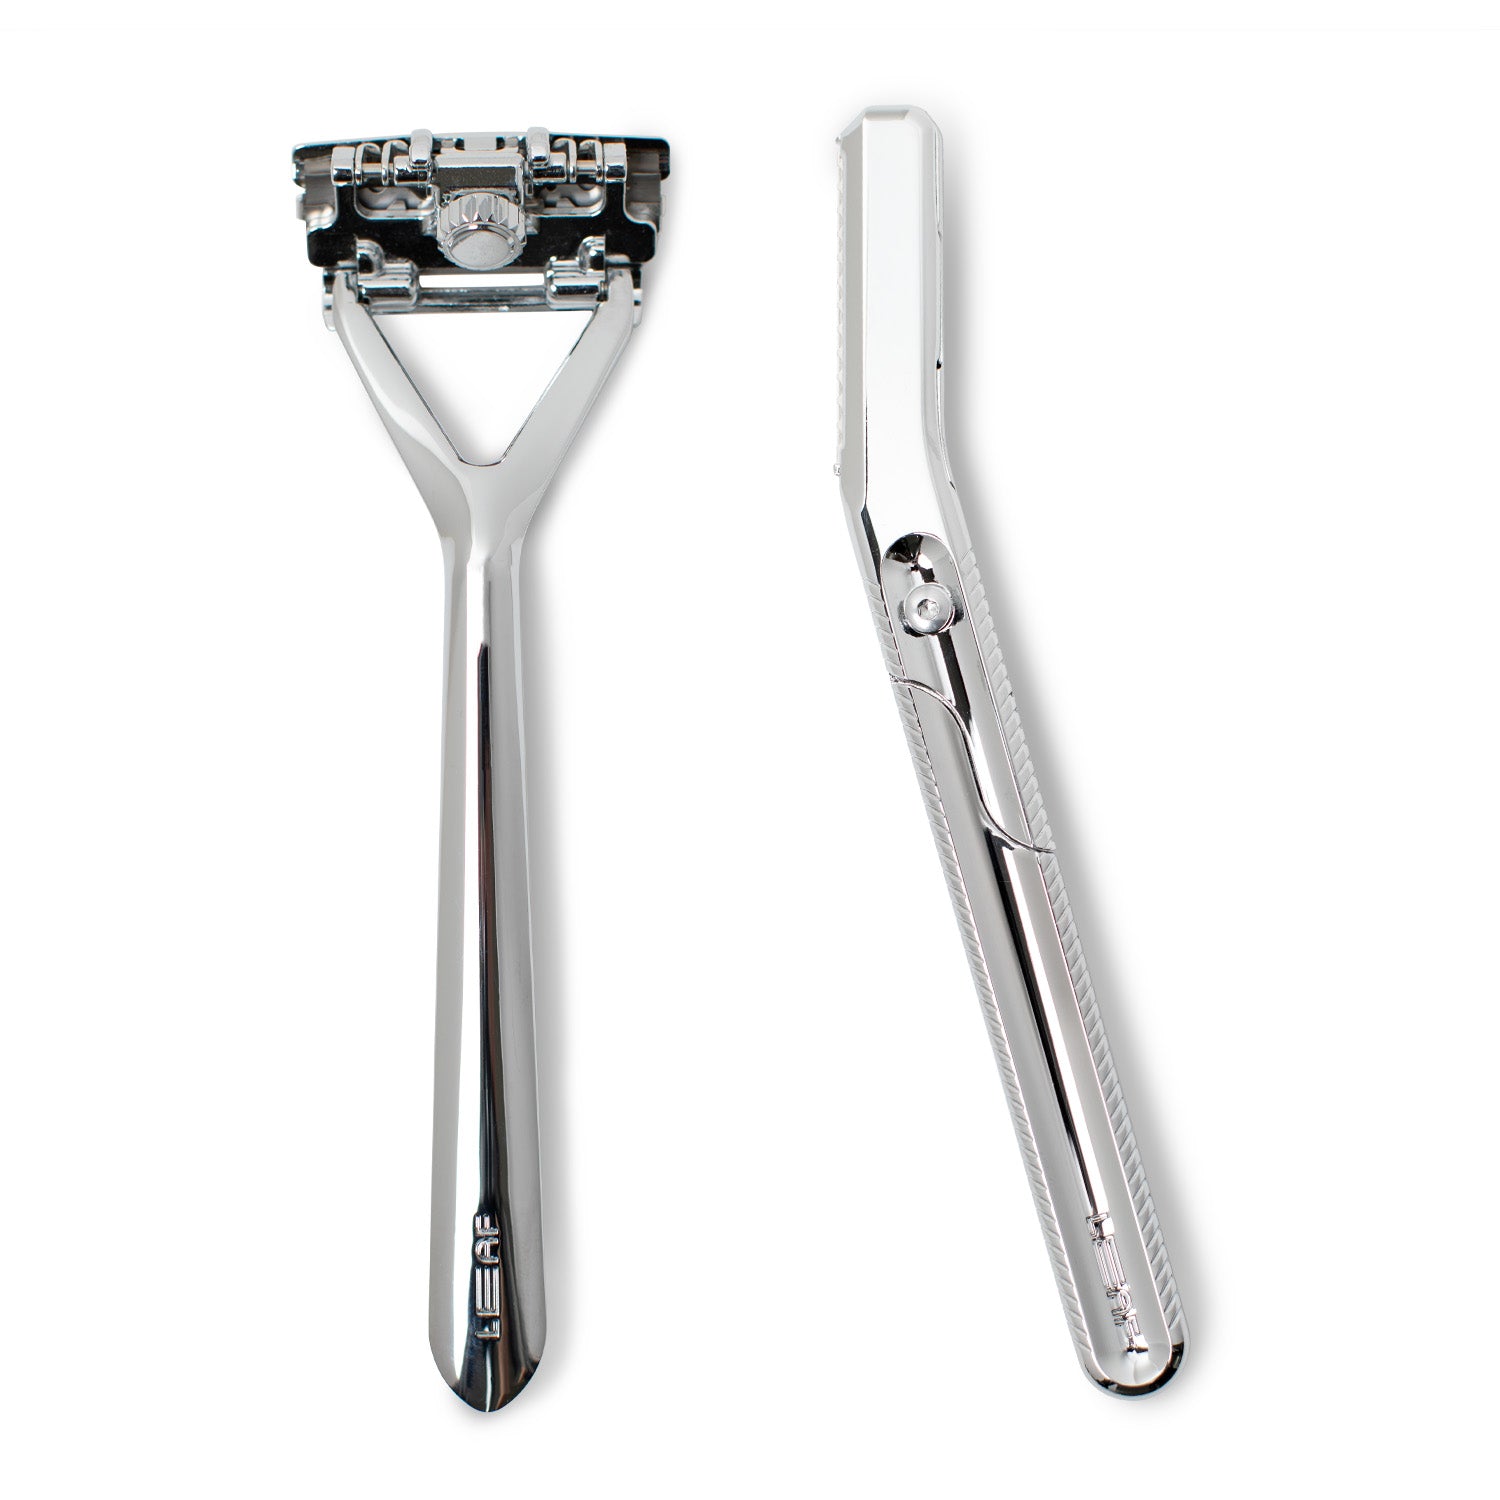 This image contains Leaf Shave brand Leaf and Dermaplaner razors on a white background, in the finish called Chrome